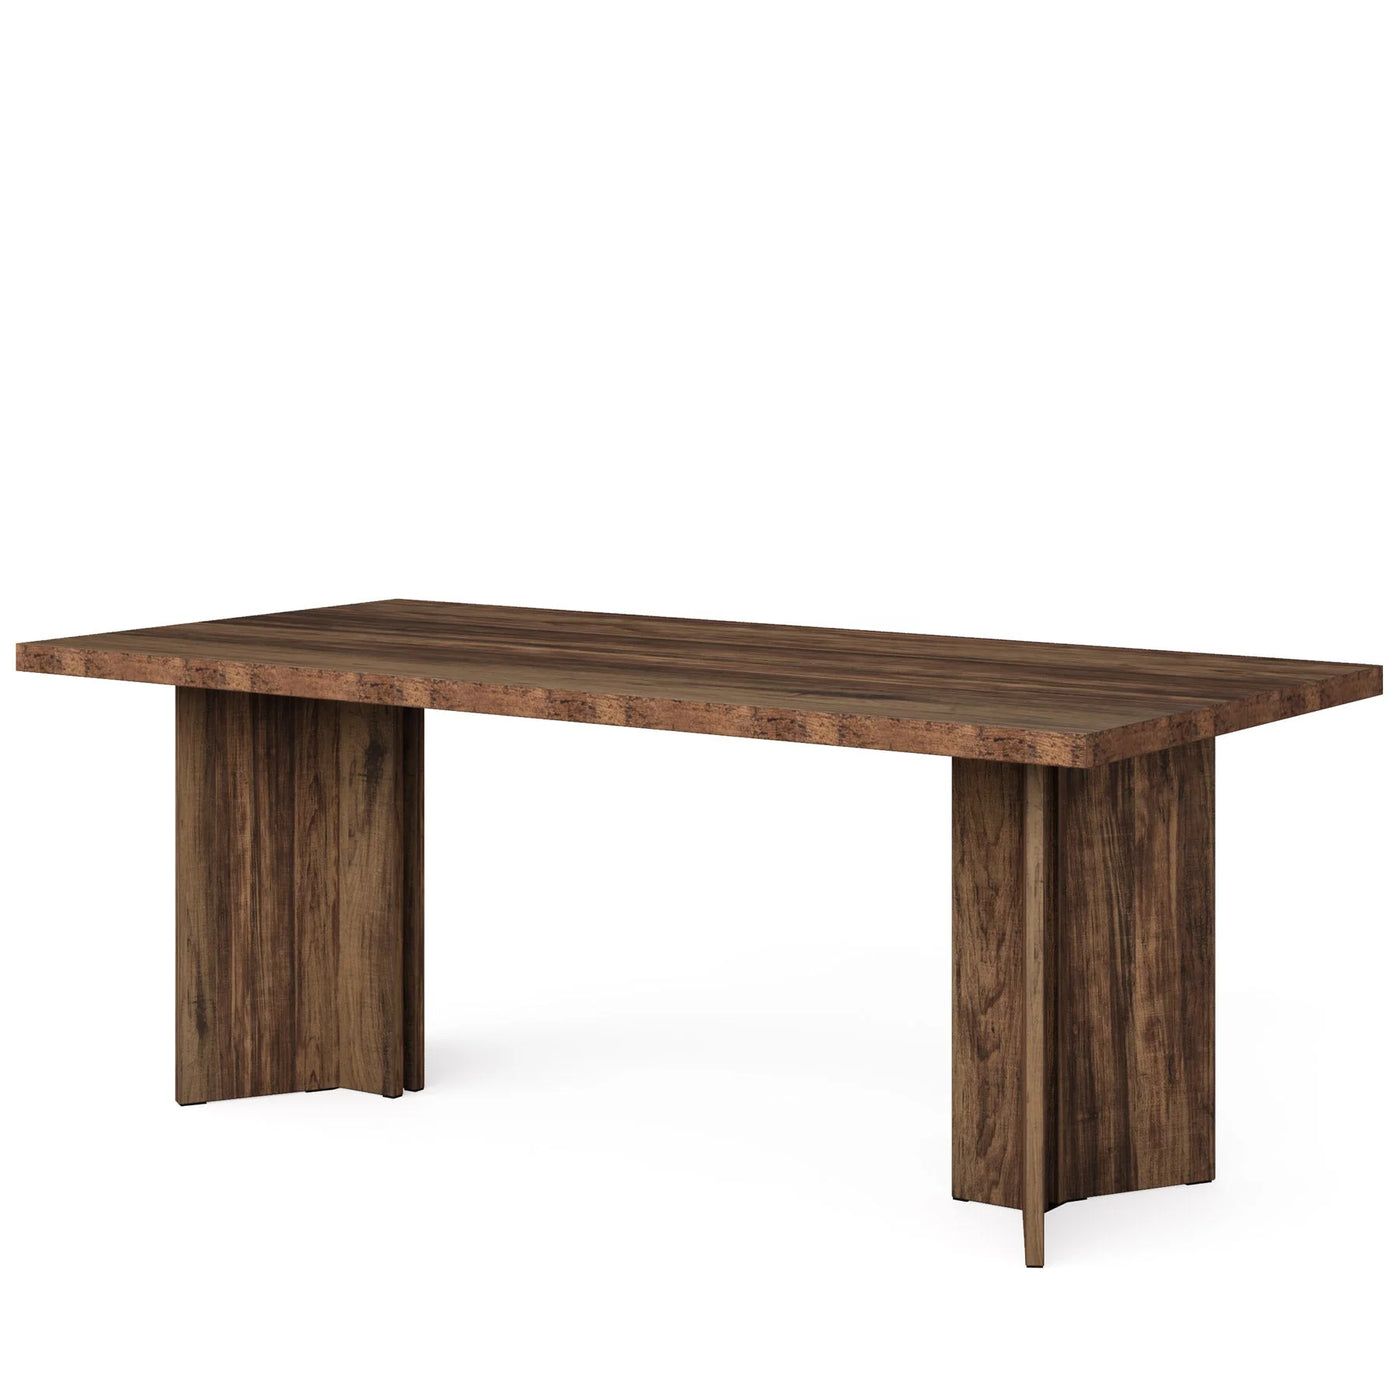 Mocha 63" Dining Table | Farmhouse Industrial Wooden Kitchen Table with Large Tabletop for 4-6